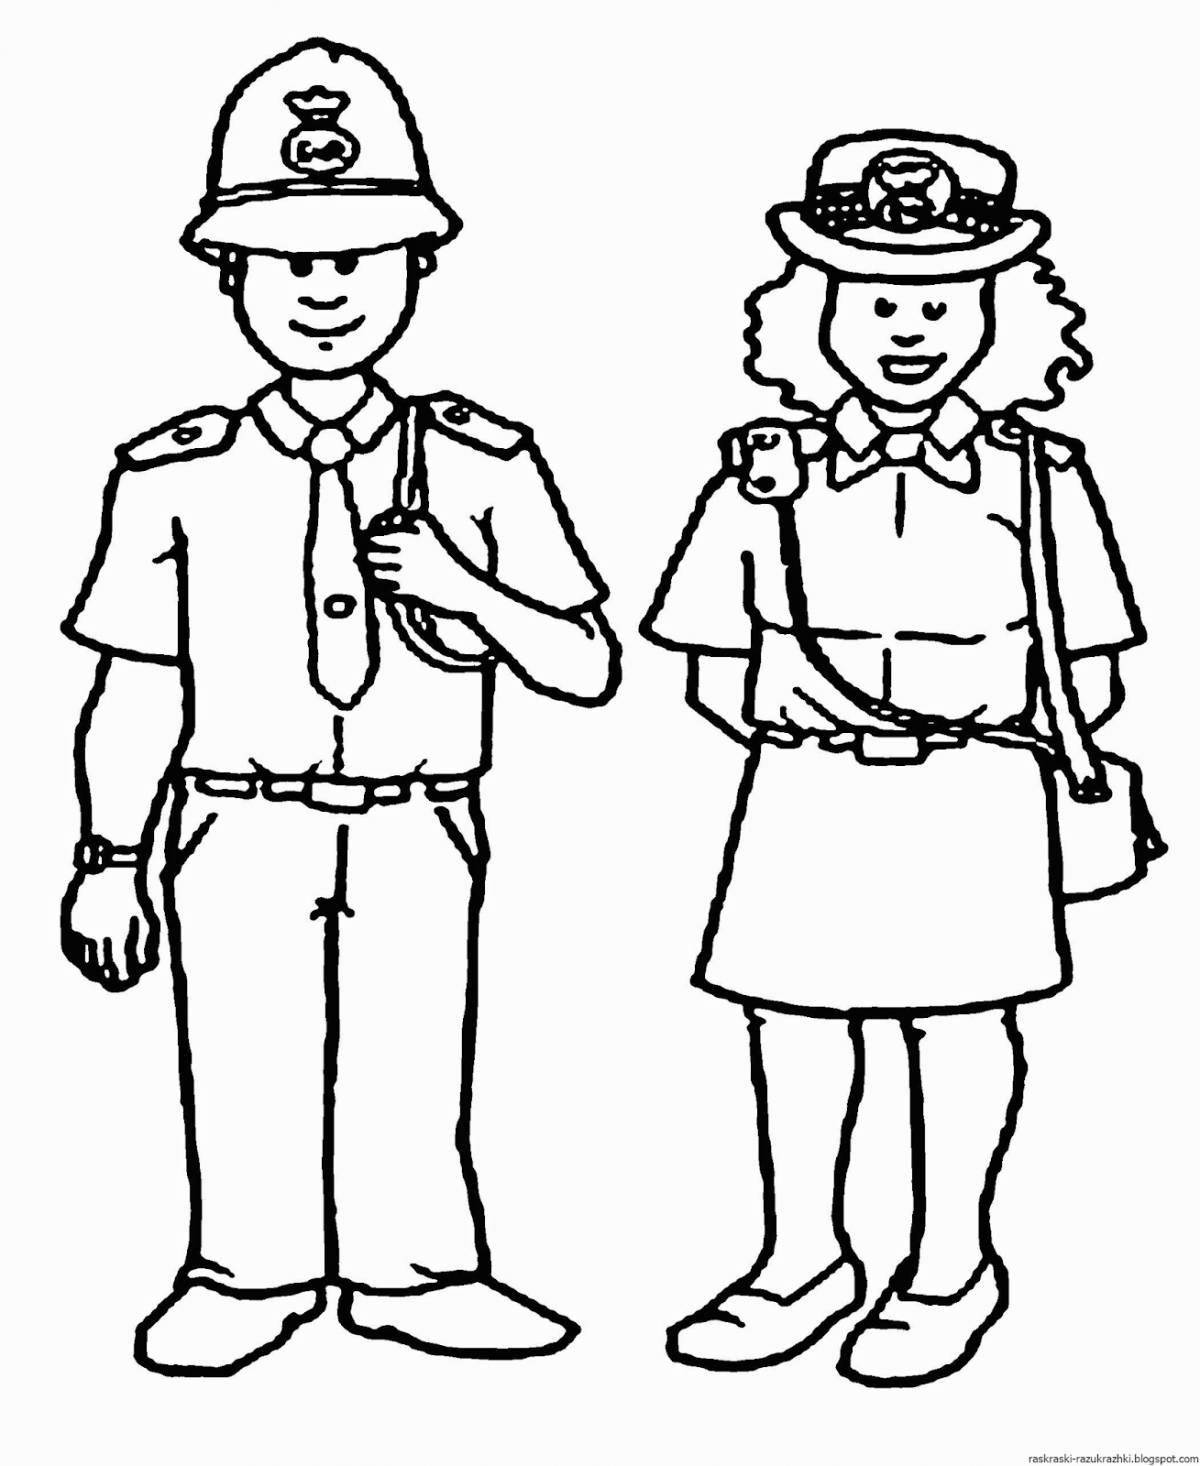 Attractive police coloring book for kids